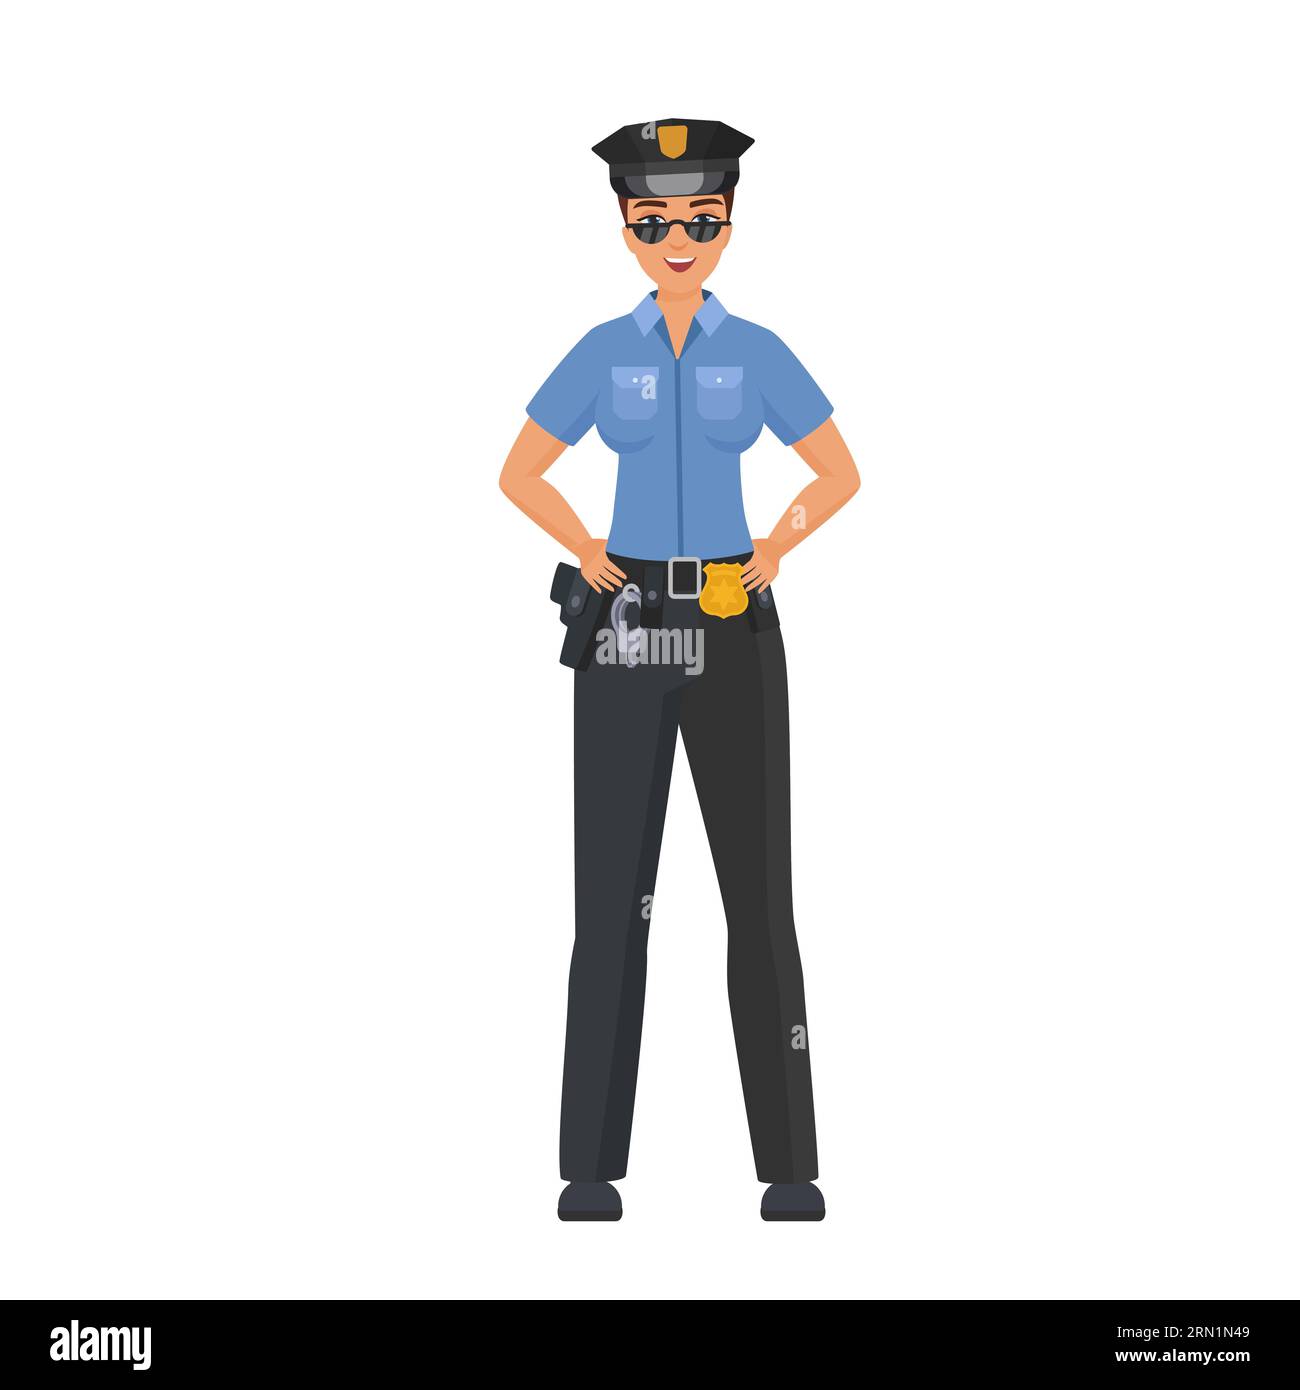 Standing policewoman with hands on hips. Confident female police officer cartoon vector illustration Stock Vector